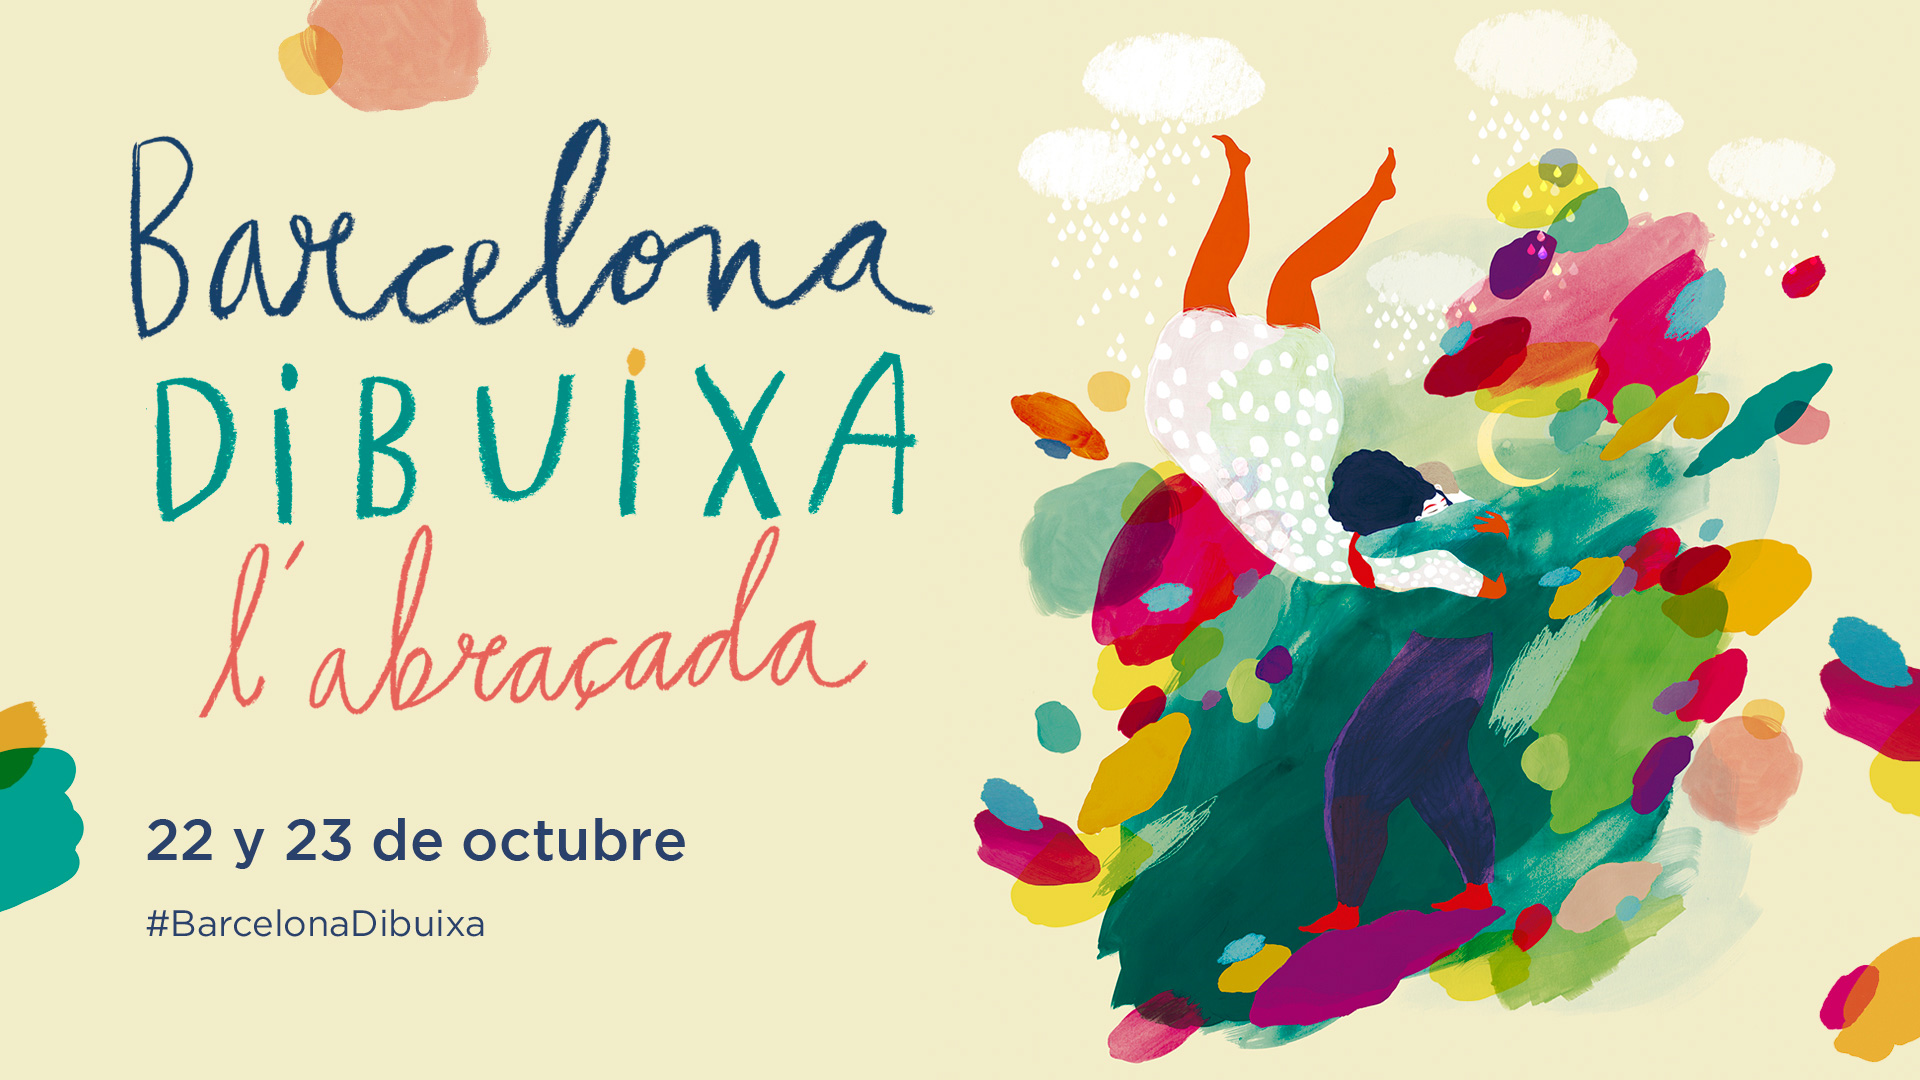 The Barcelona Dibuixa 2022 Festival in honor of the embraces